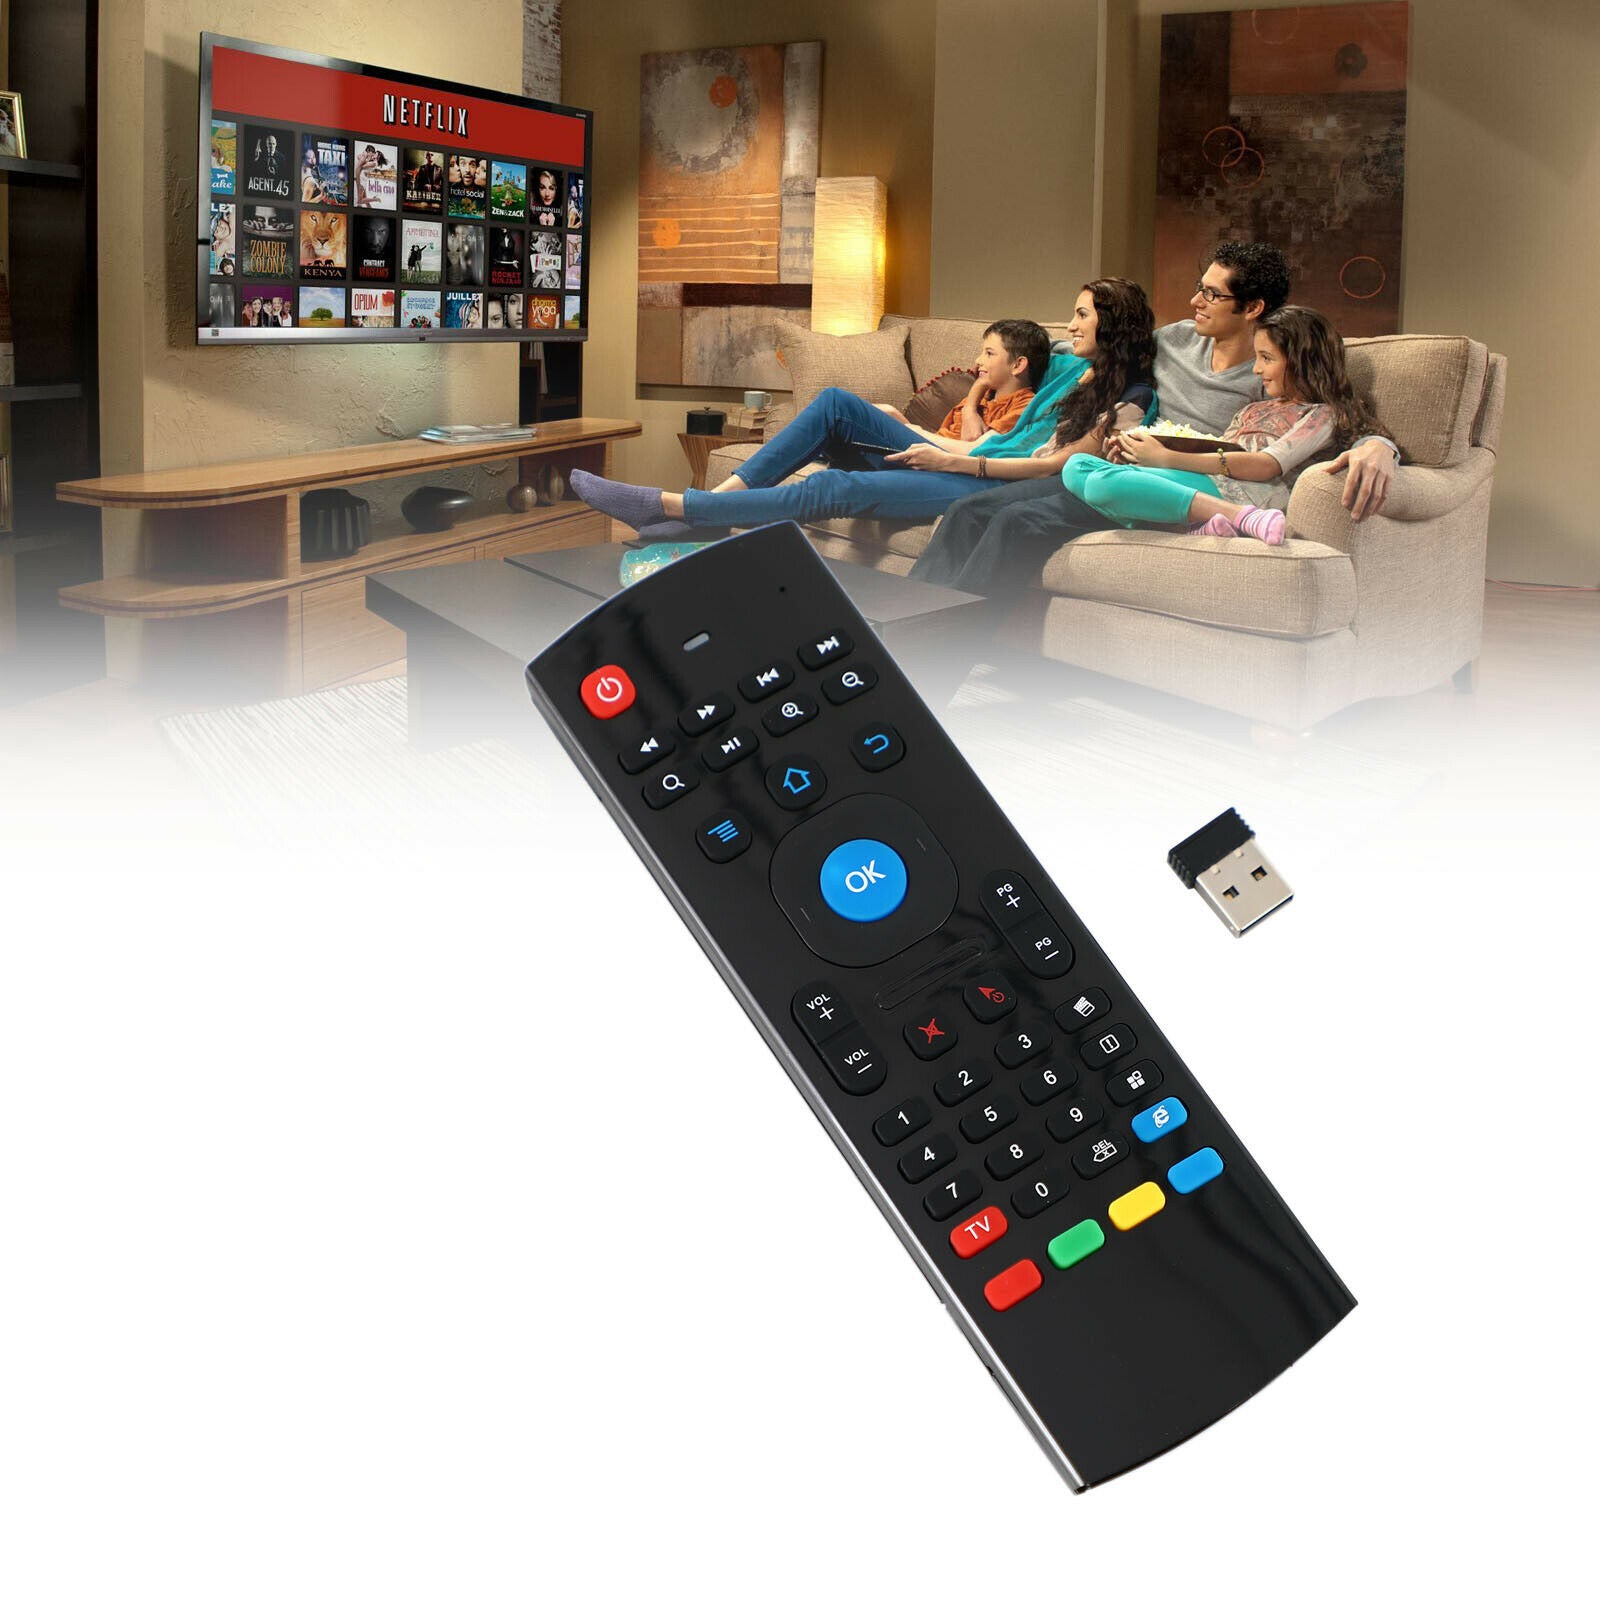 MX3 Air Fly Mouse 2.4GHz Wireless Keyboard Remote control For PC/Android TV Box